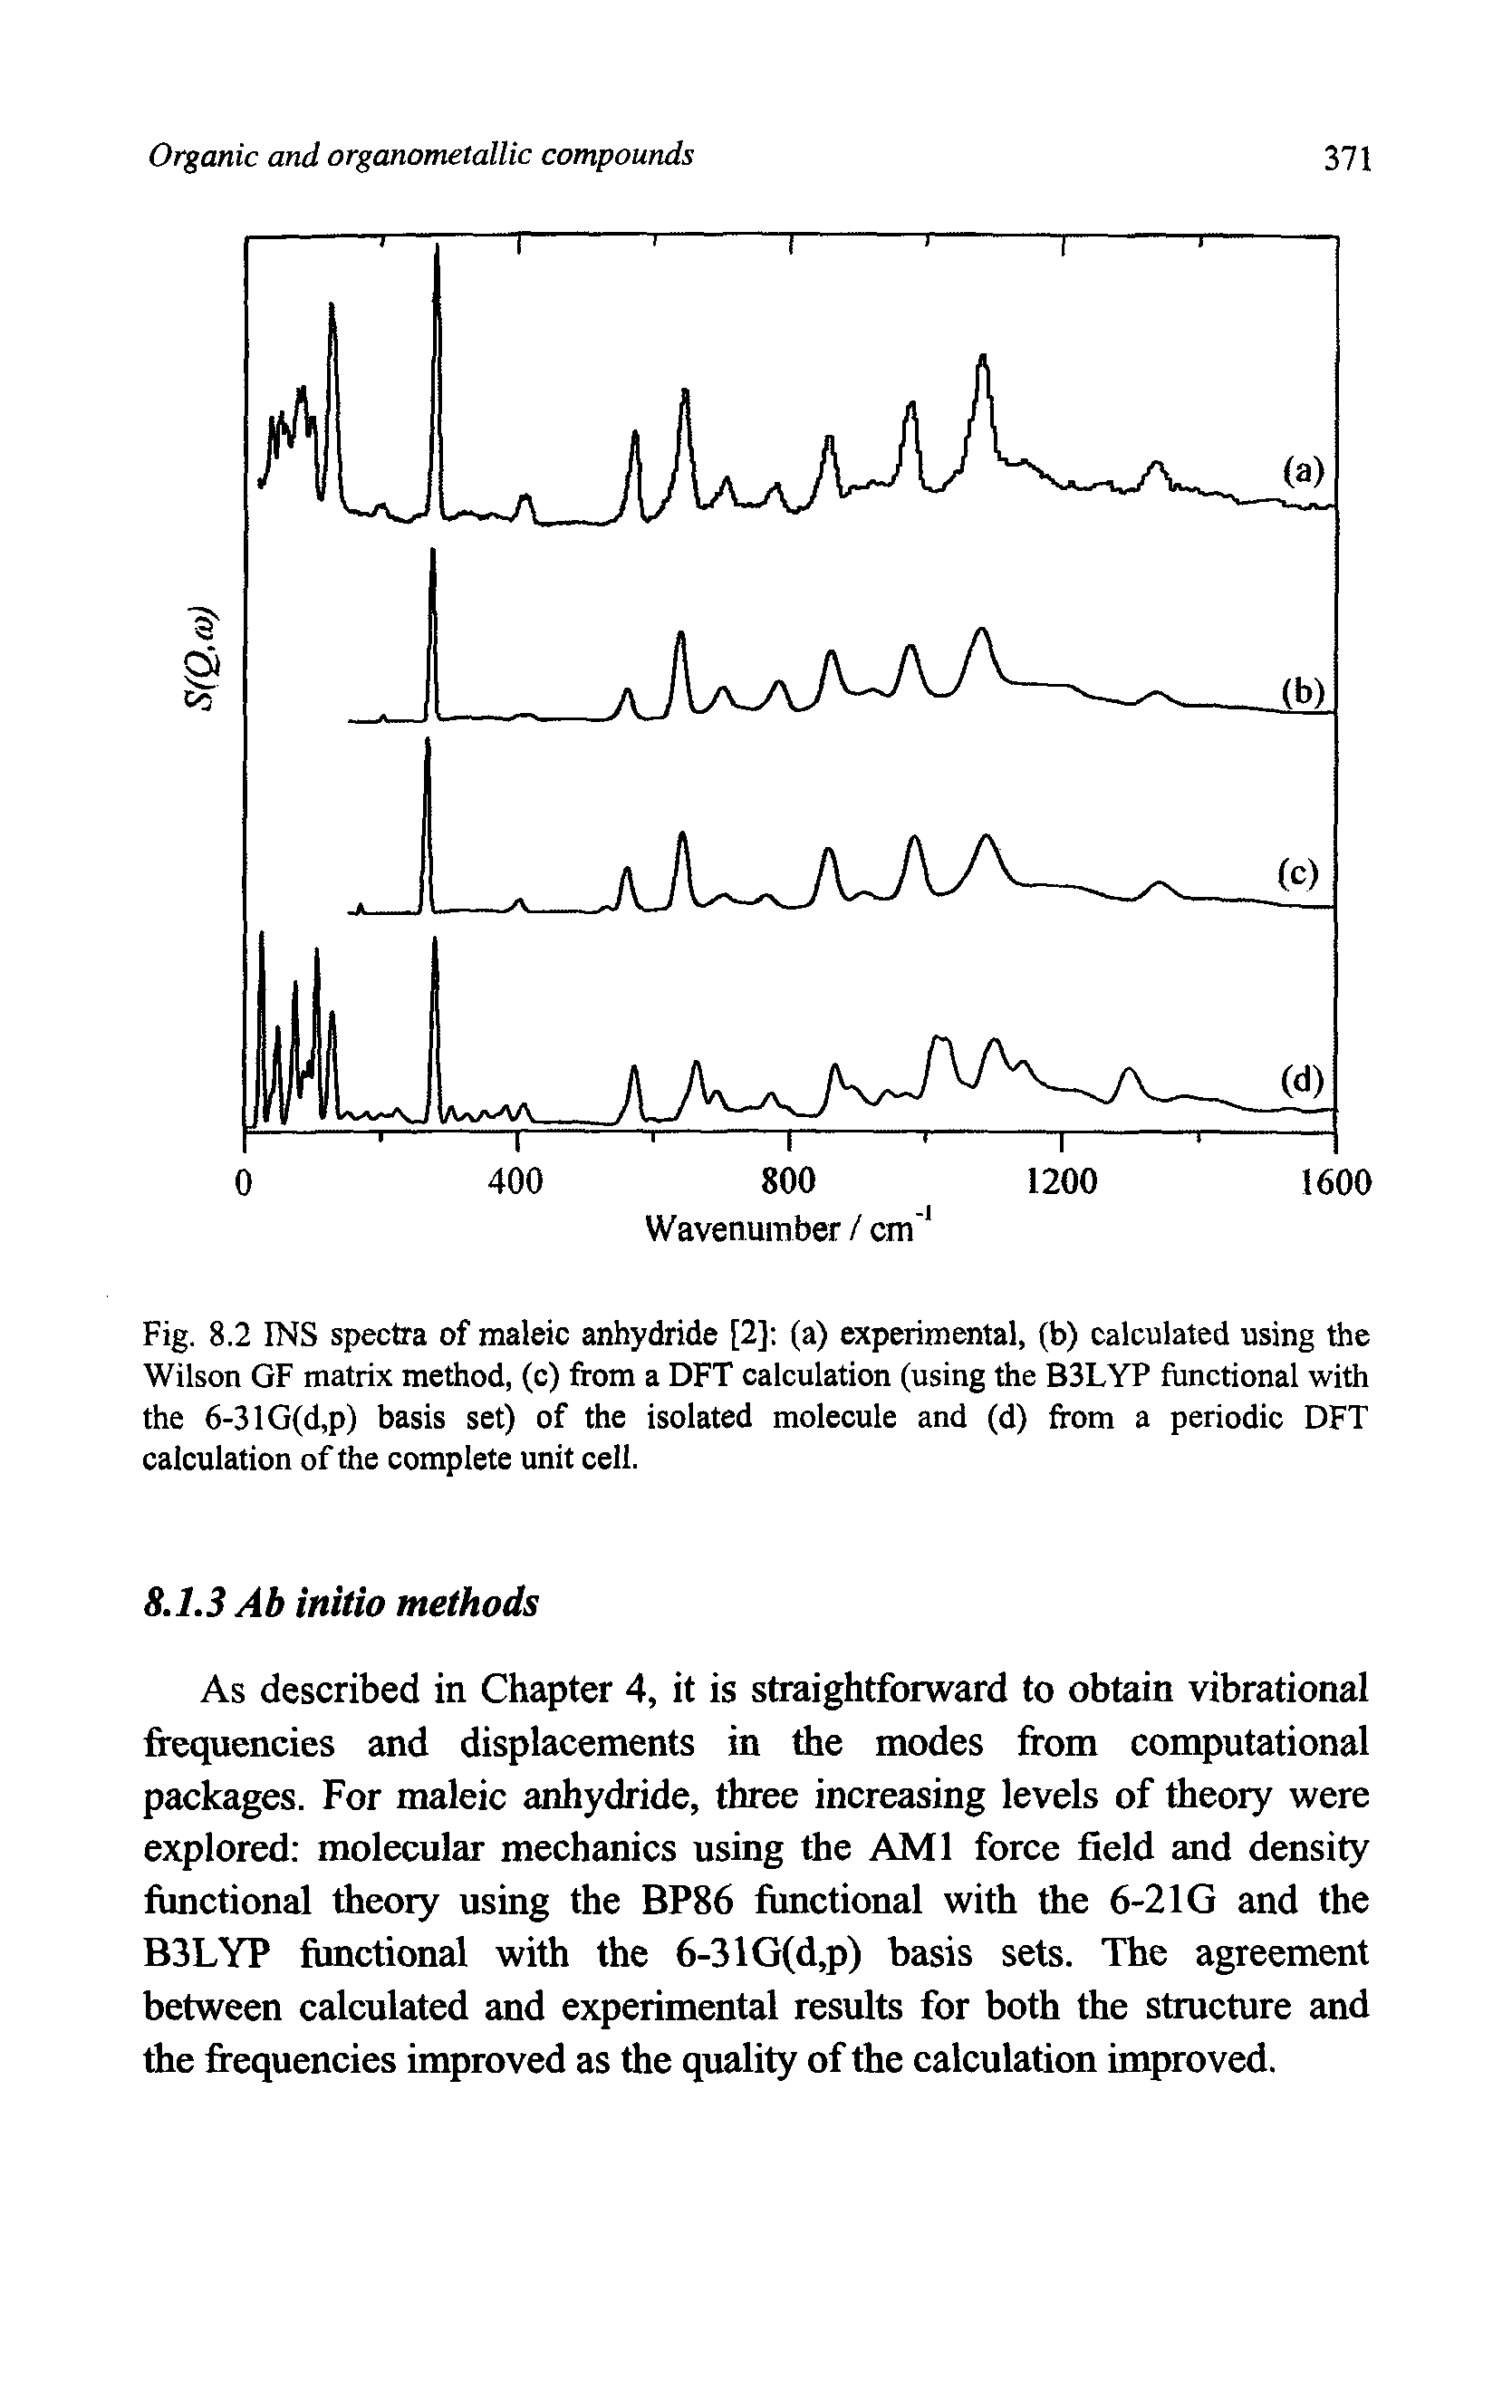 Fig. 8.2 INS spectra of maleic anhydride [2] (a) experimental, (b) calculated using the Wilson GF matrix method, (c) from a DFT calculation (using the B3LYP functional with the 6-31G(d,p) basis set) of the isolated molecule and (d) from a periodic DFT calculation of the complete unit cell.